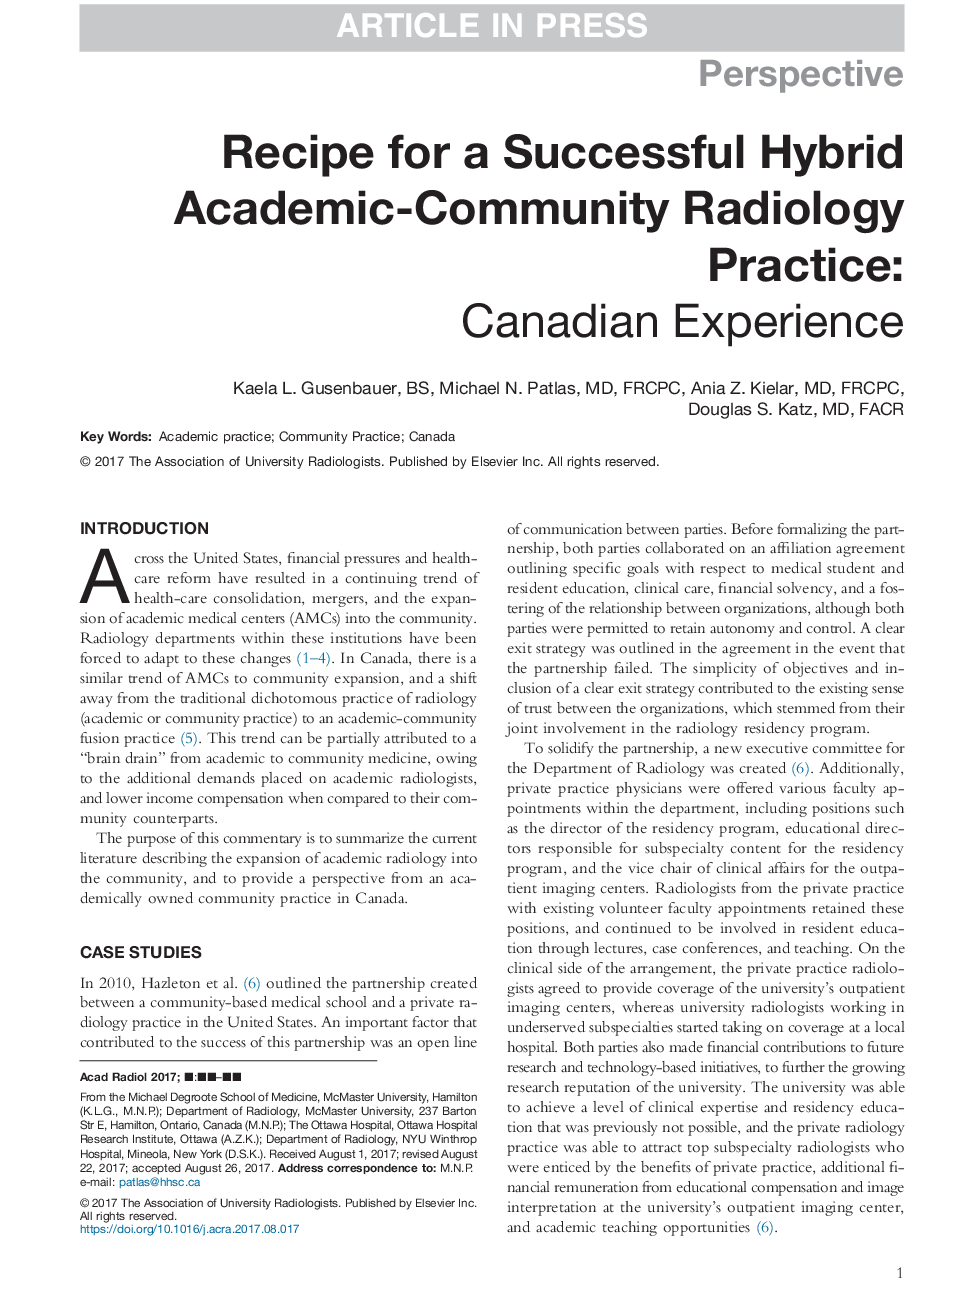 Recipe for a Successful Hybrid Academic-Community Radiology Practice